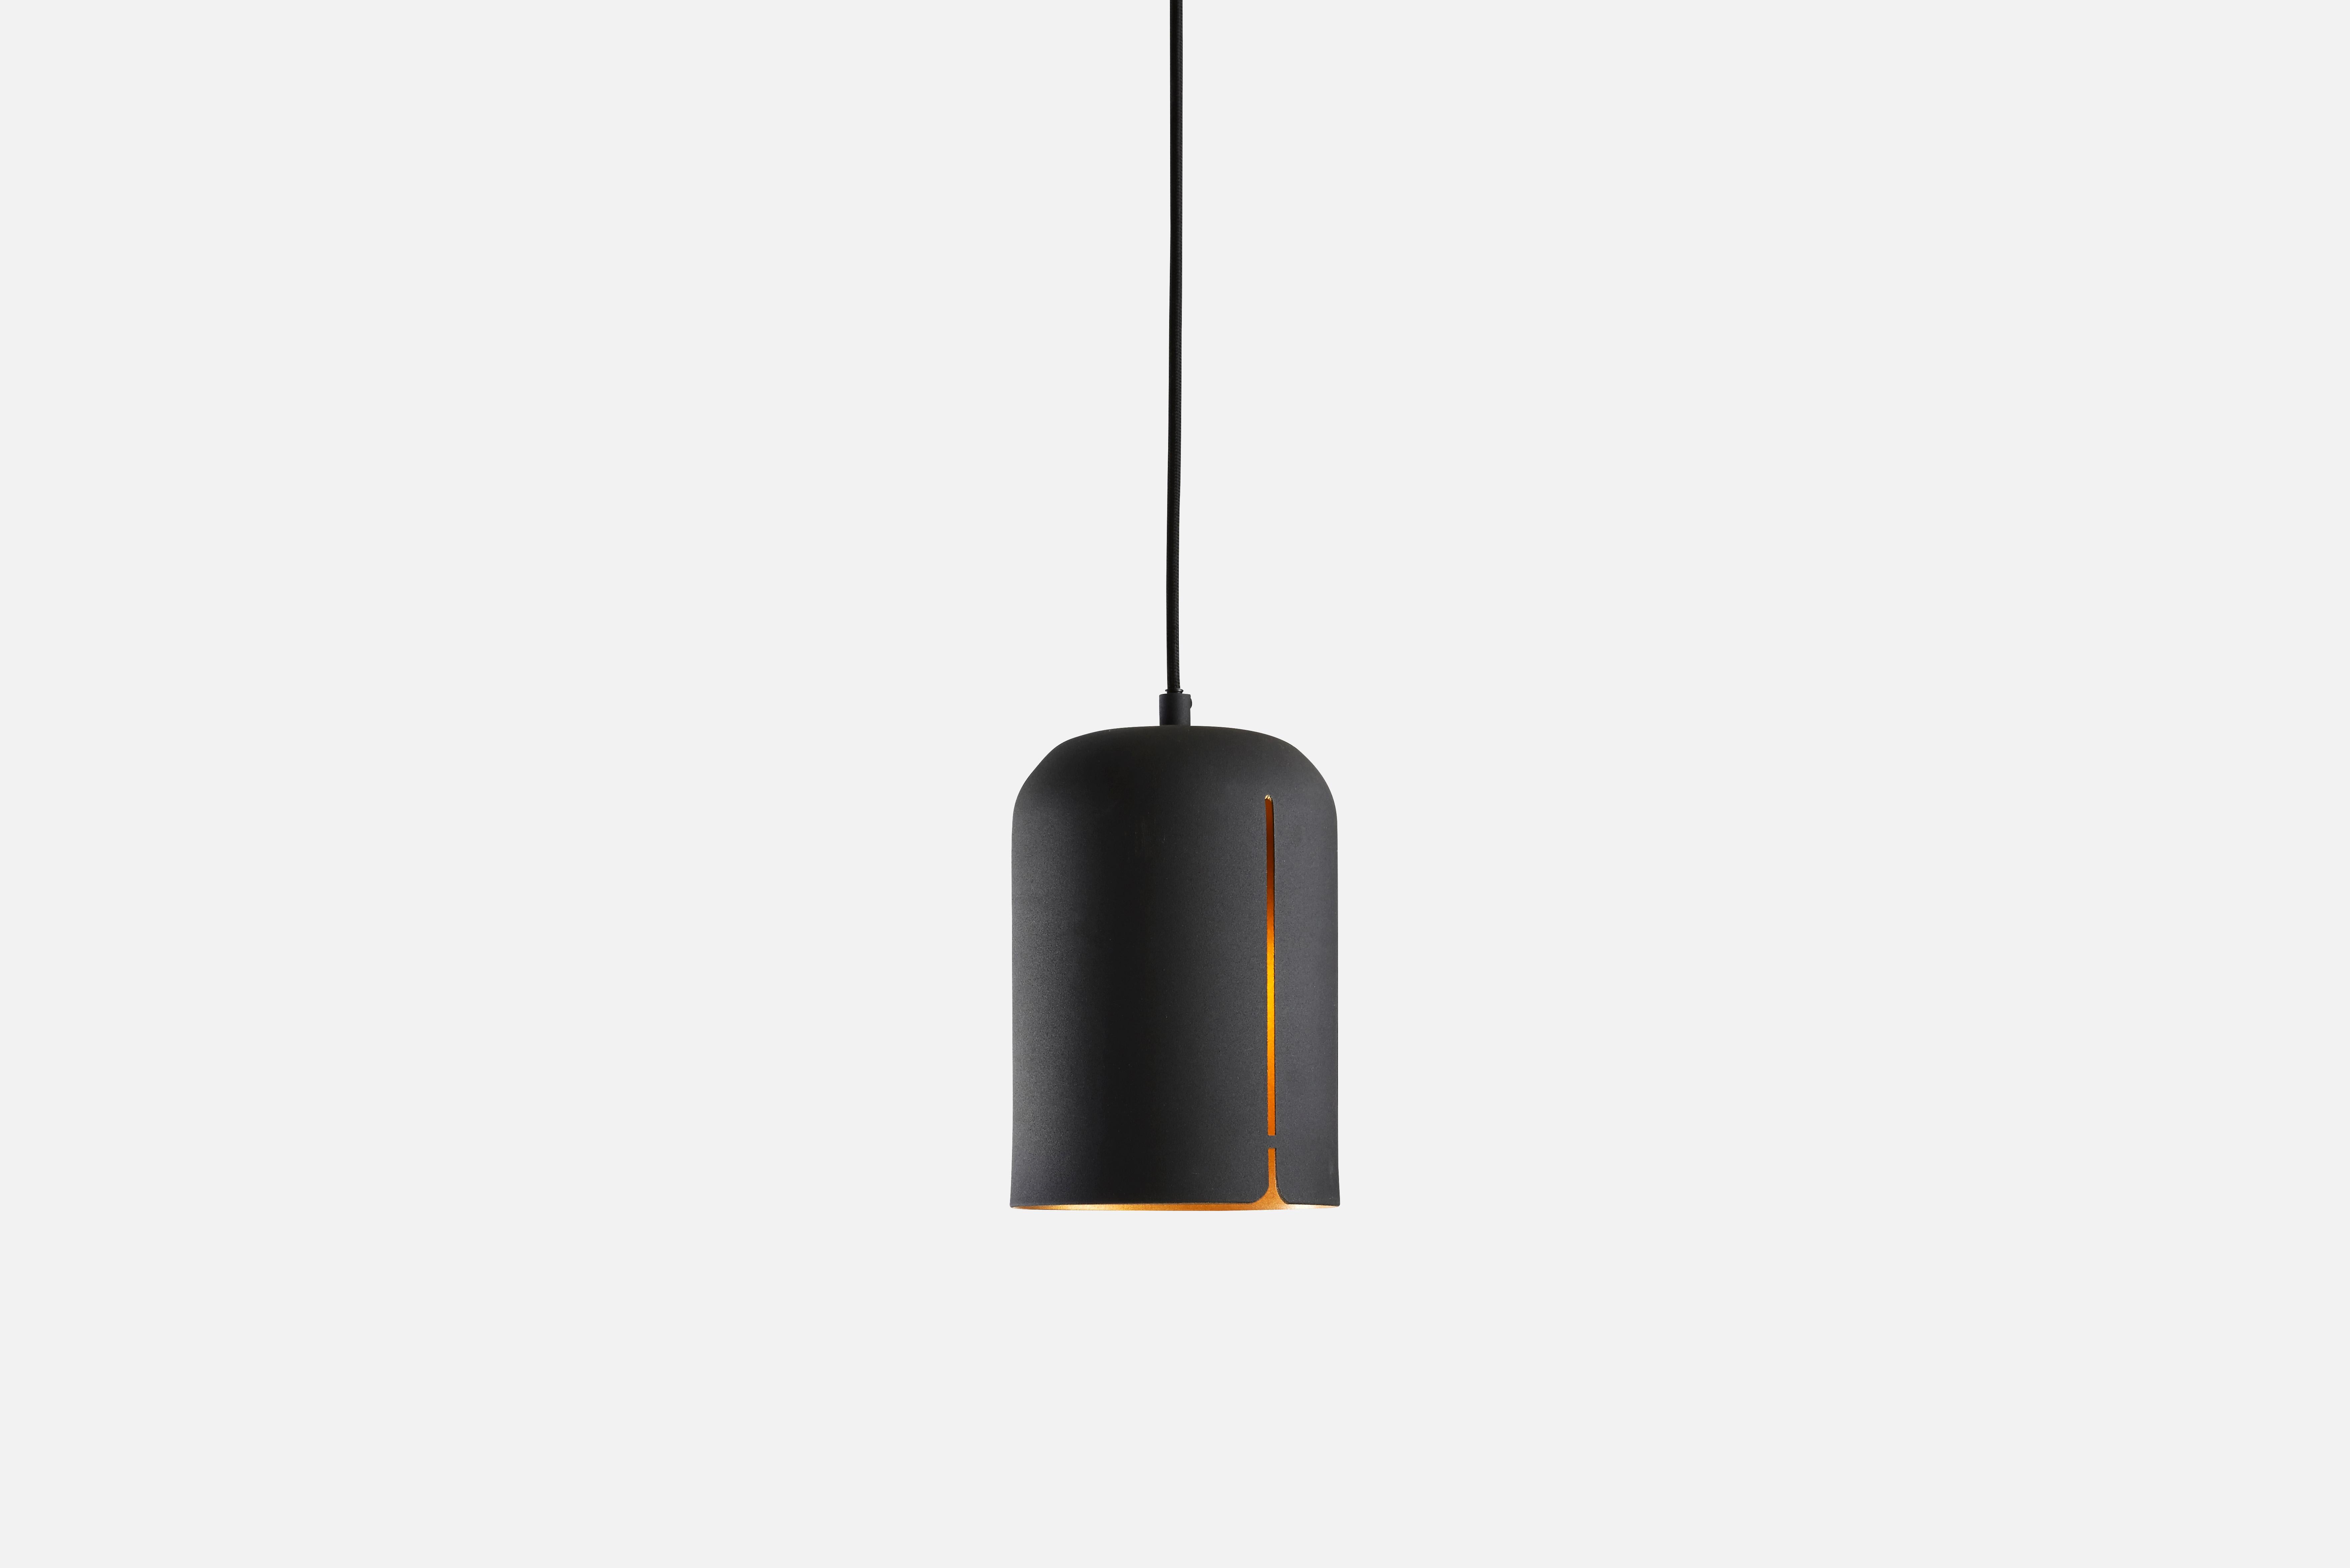 Short Gap pendant lamp by Nur Design
Materials: Metal.
Dimensions: D 14 x H 20 cm

NUR design is a Danish design studio focusing on Nordic traditions with a strive to create classic and functional design. In German, the word NUR means ‘only’ and